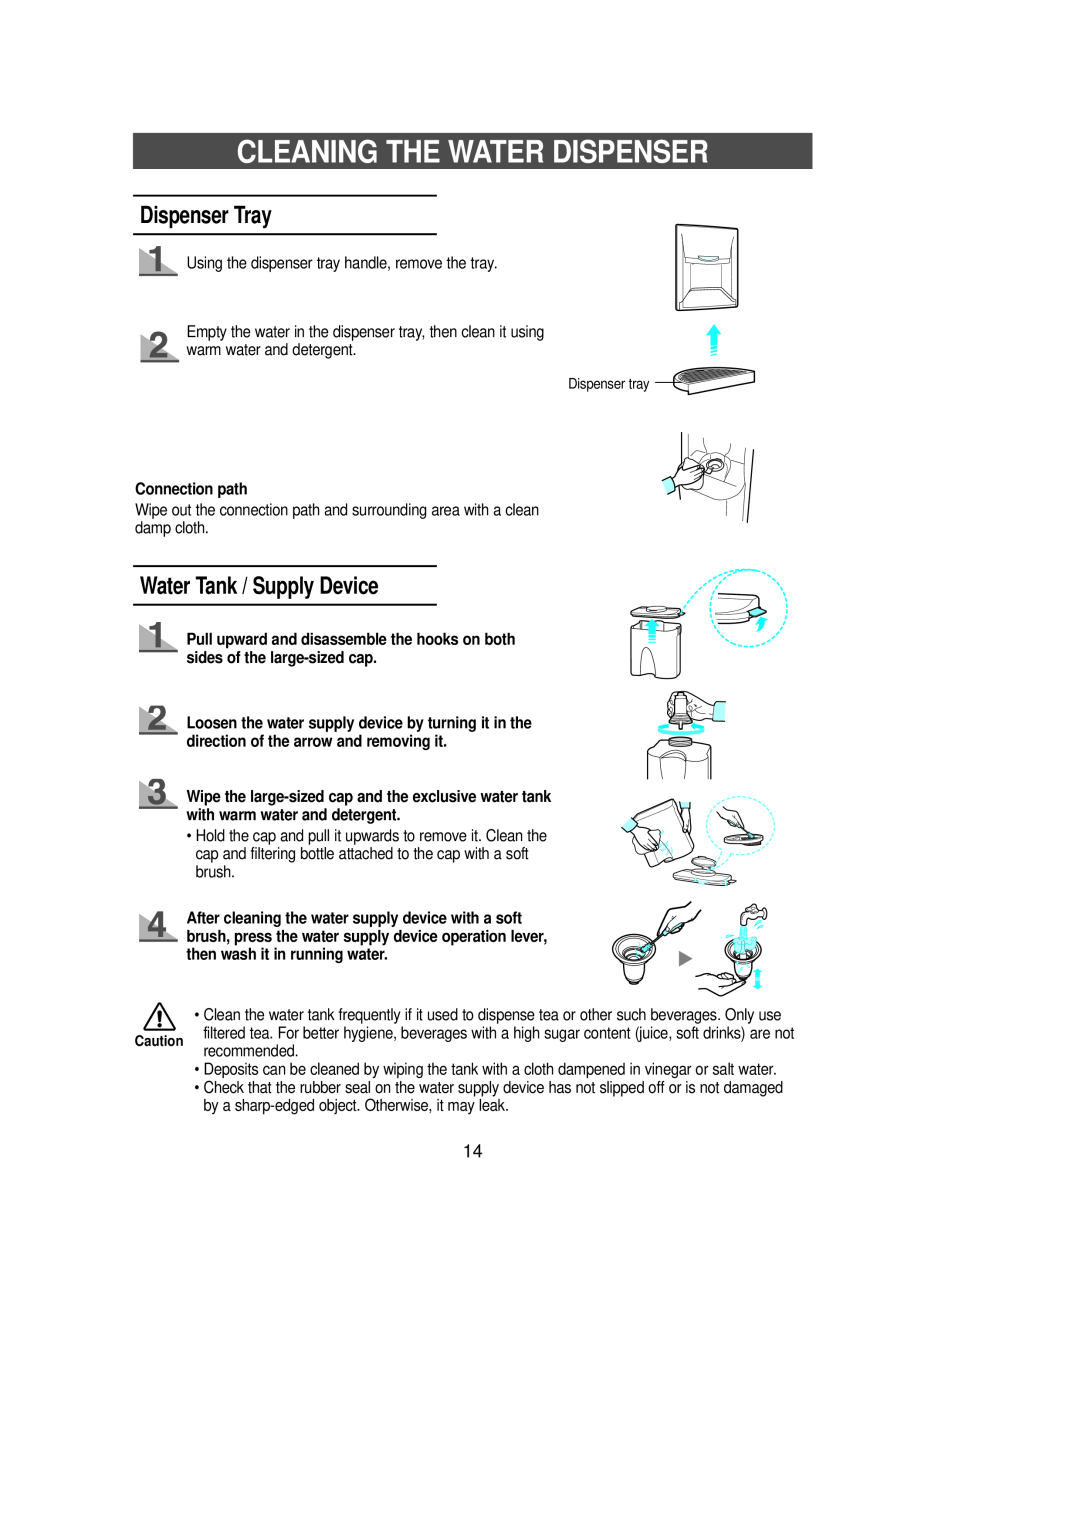 Samsung DA68-01281A manual Cleaning The Water Dispenser, Dispenser Tray, Water Tank / Supply Device, Connection path 